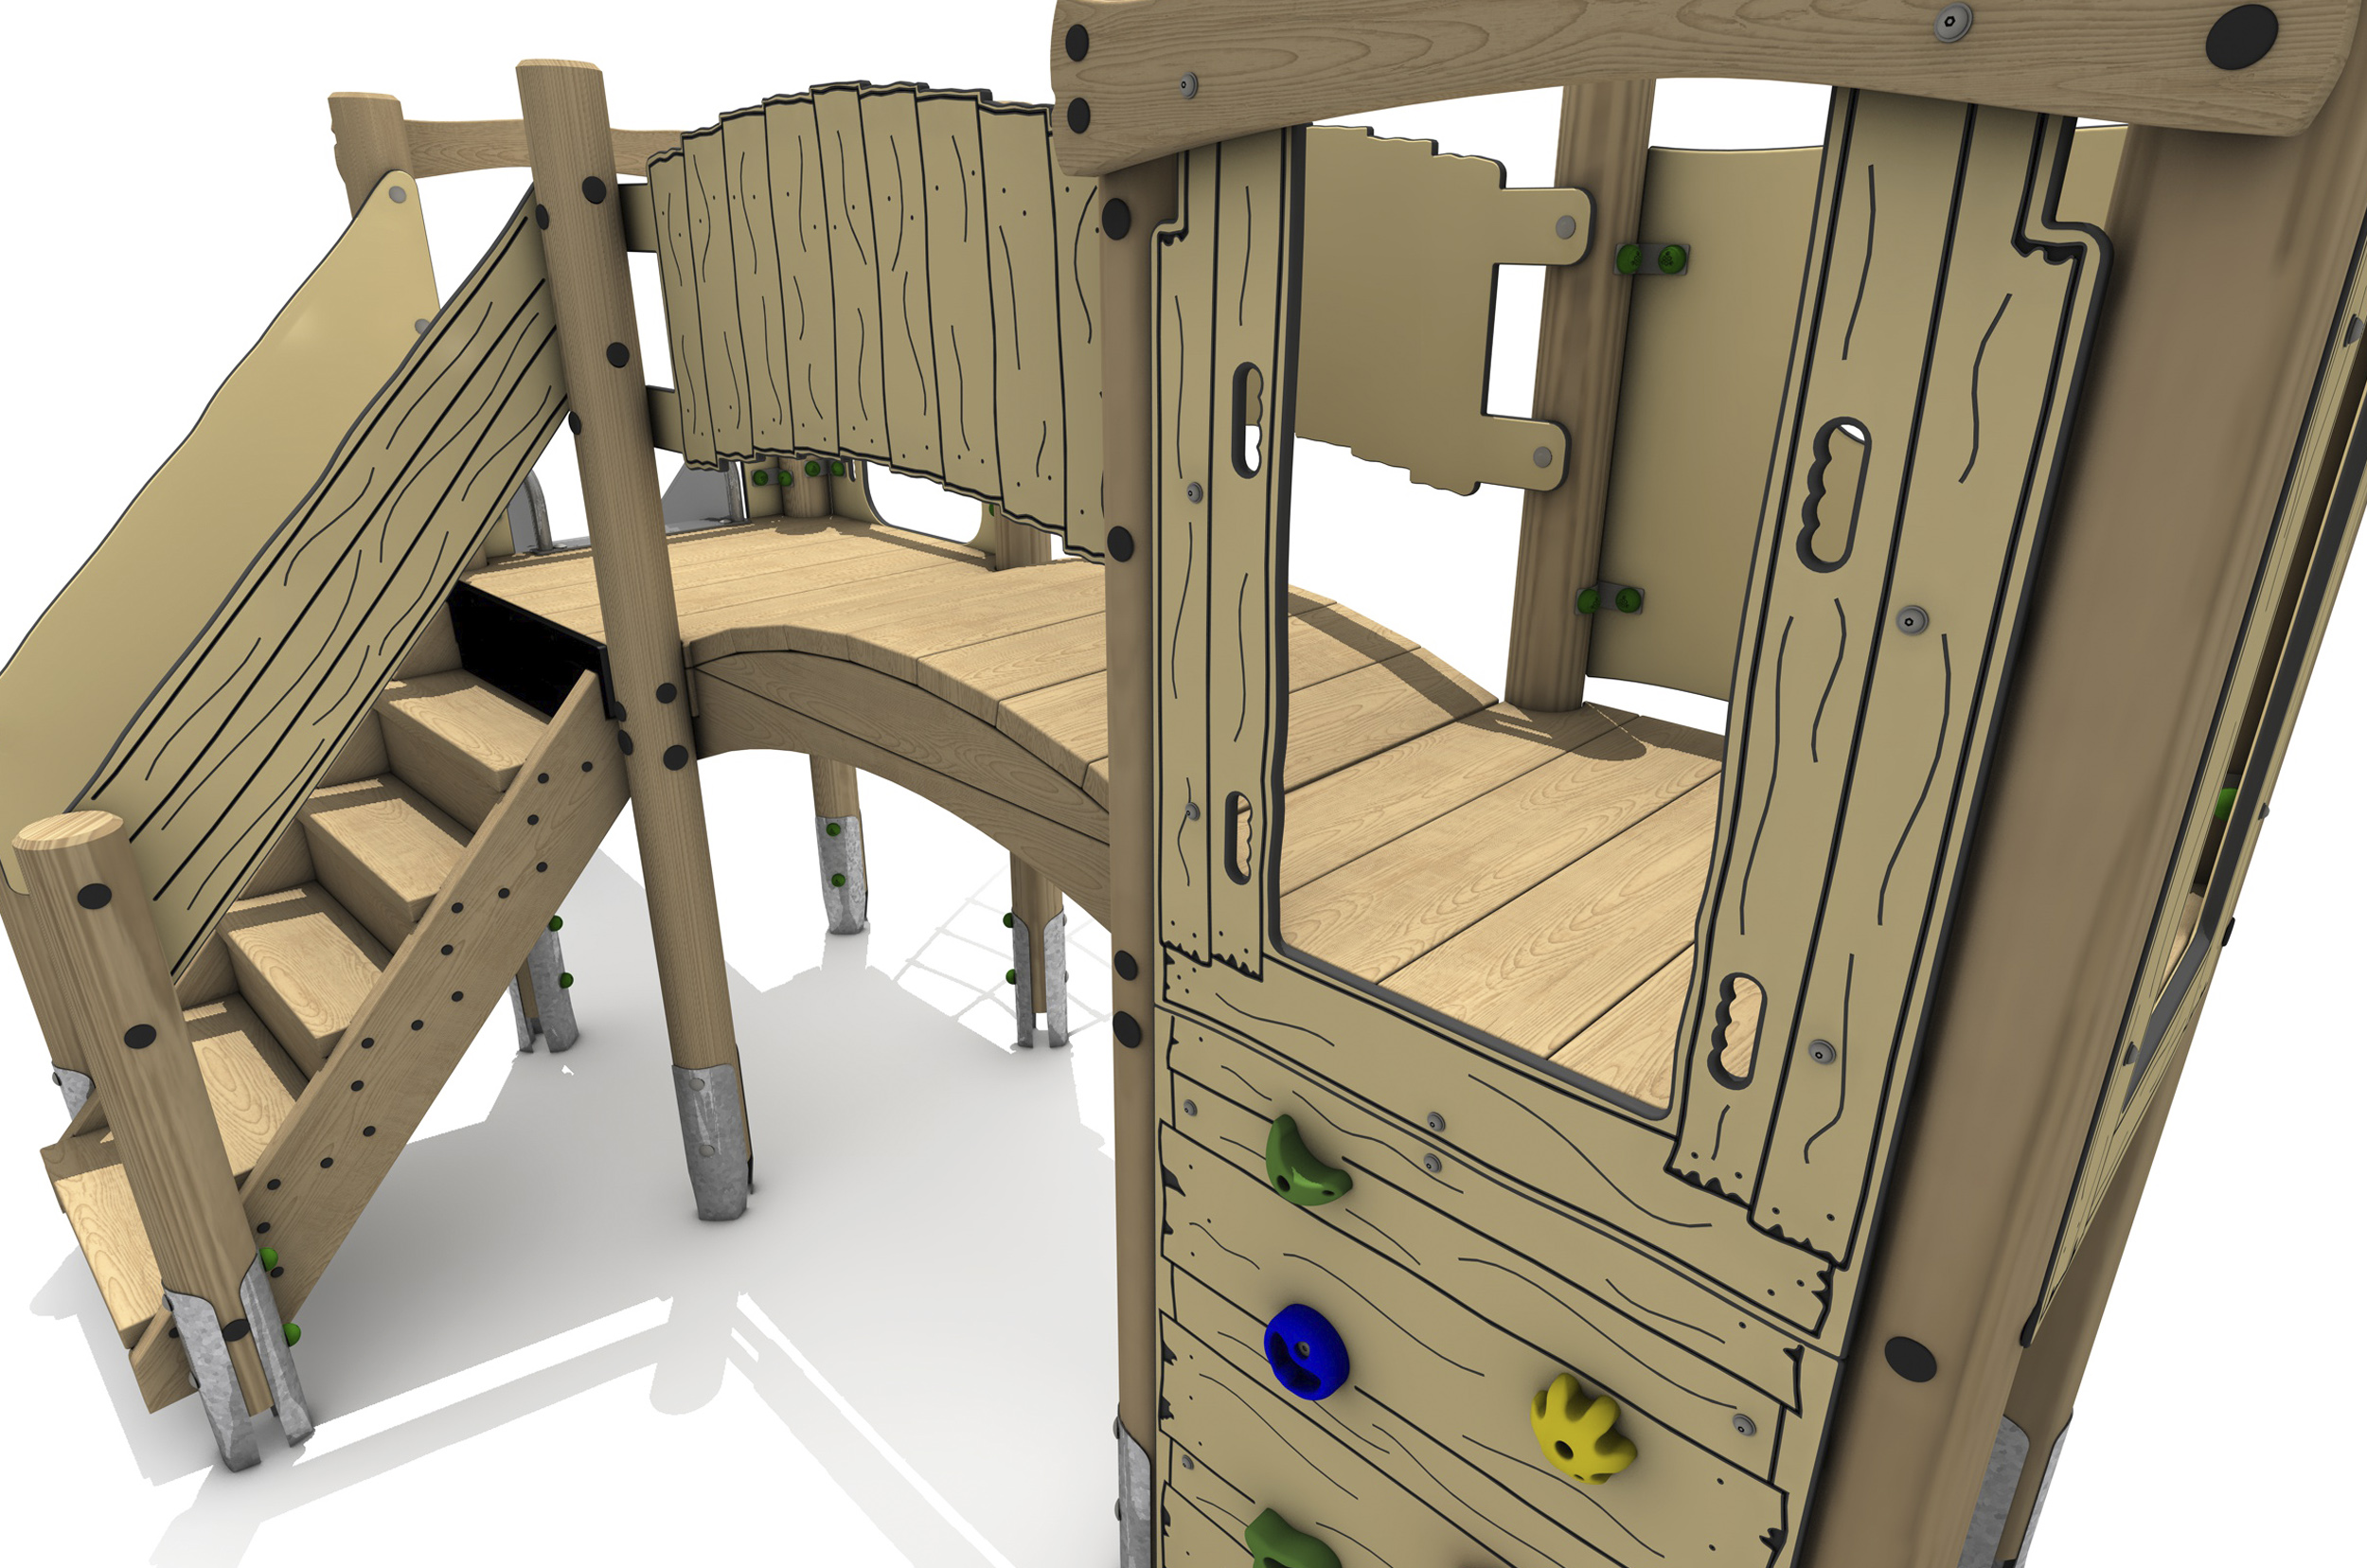 Timber Tower Double Deck 01, A timber tower climber platform is accessed by a vertical climb wall with multicoloured hand and foot holds, there is a step of steps on the left side, the second platform is linked by the link bridge in the middle.